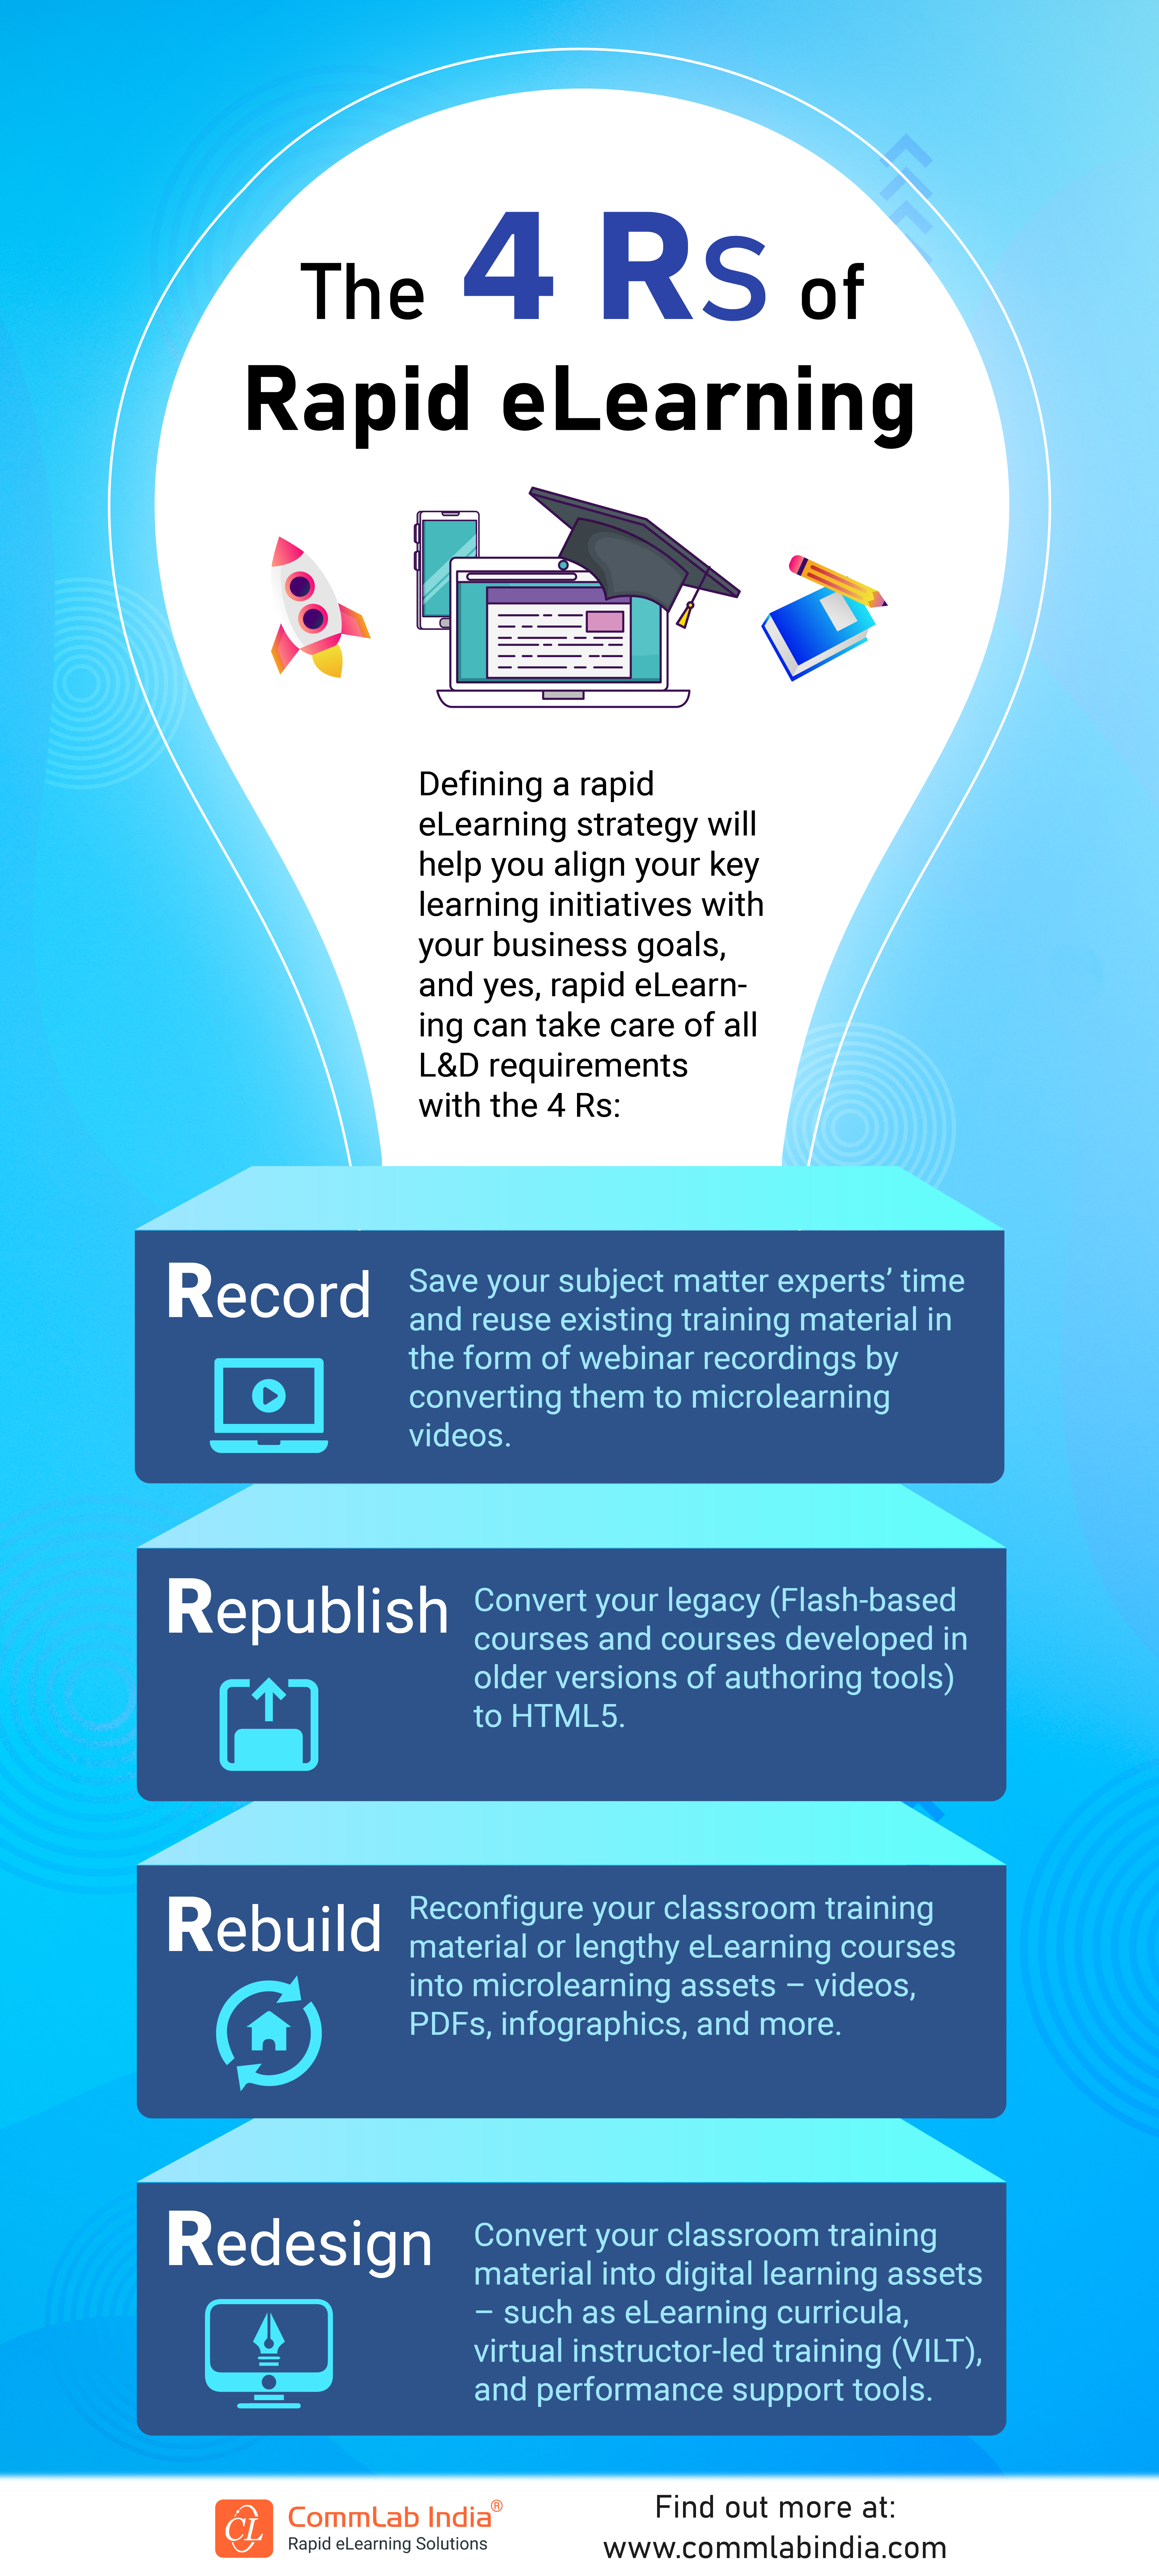 The 4R Strategy for Rapid eLearning